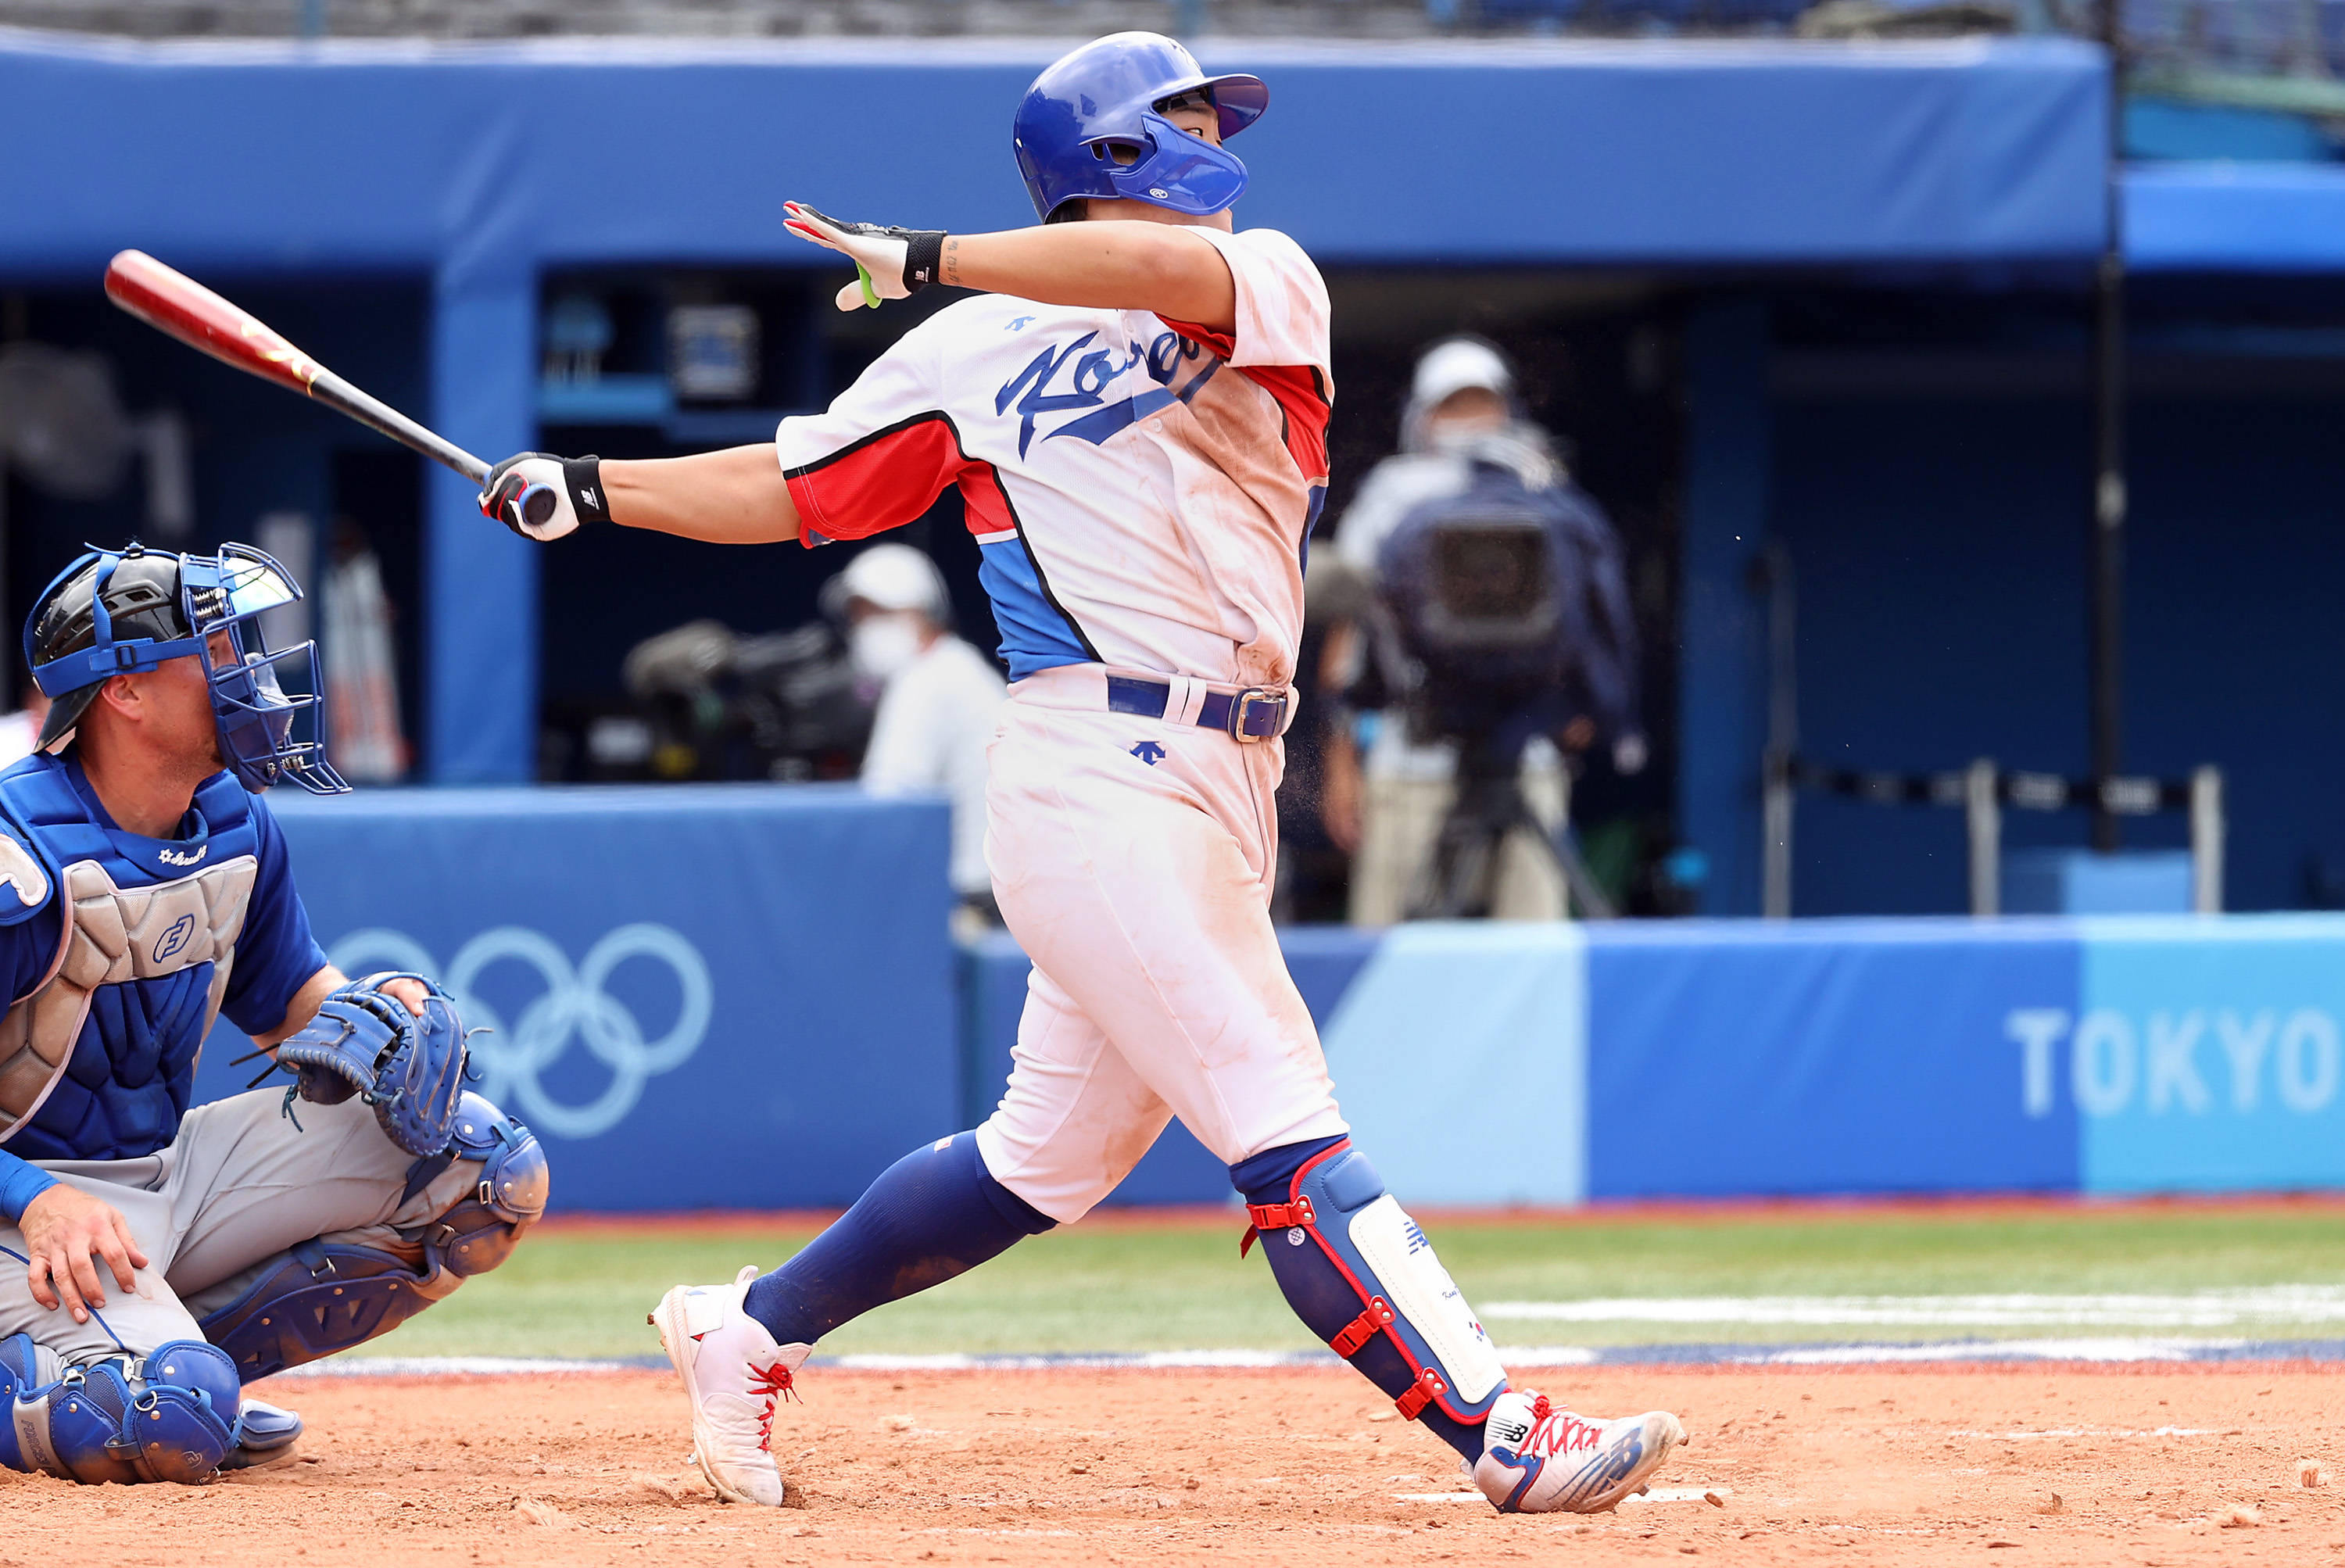 2021 KBO Players You Should Know Just Baseball